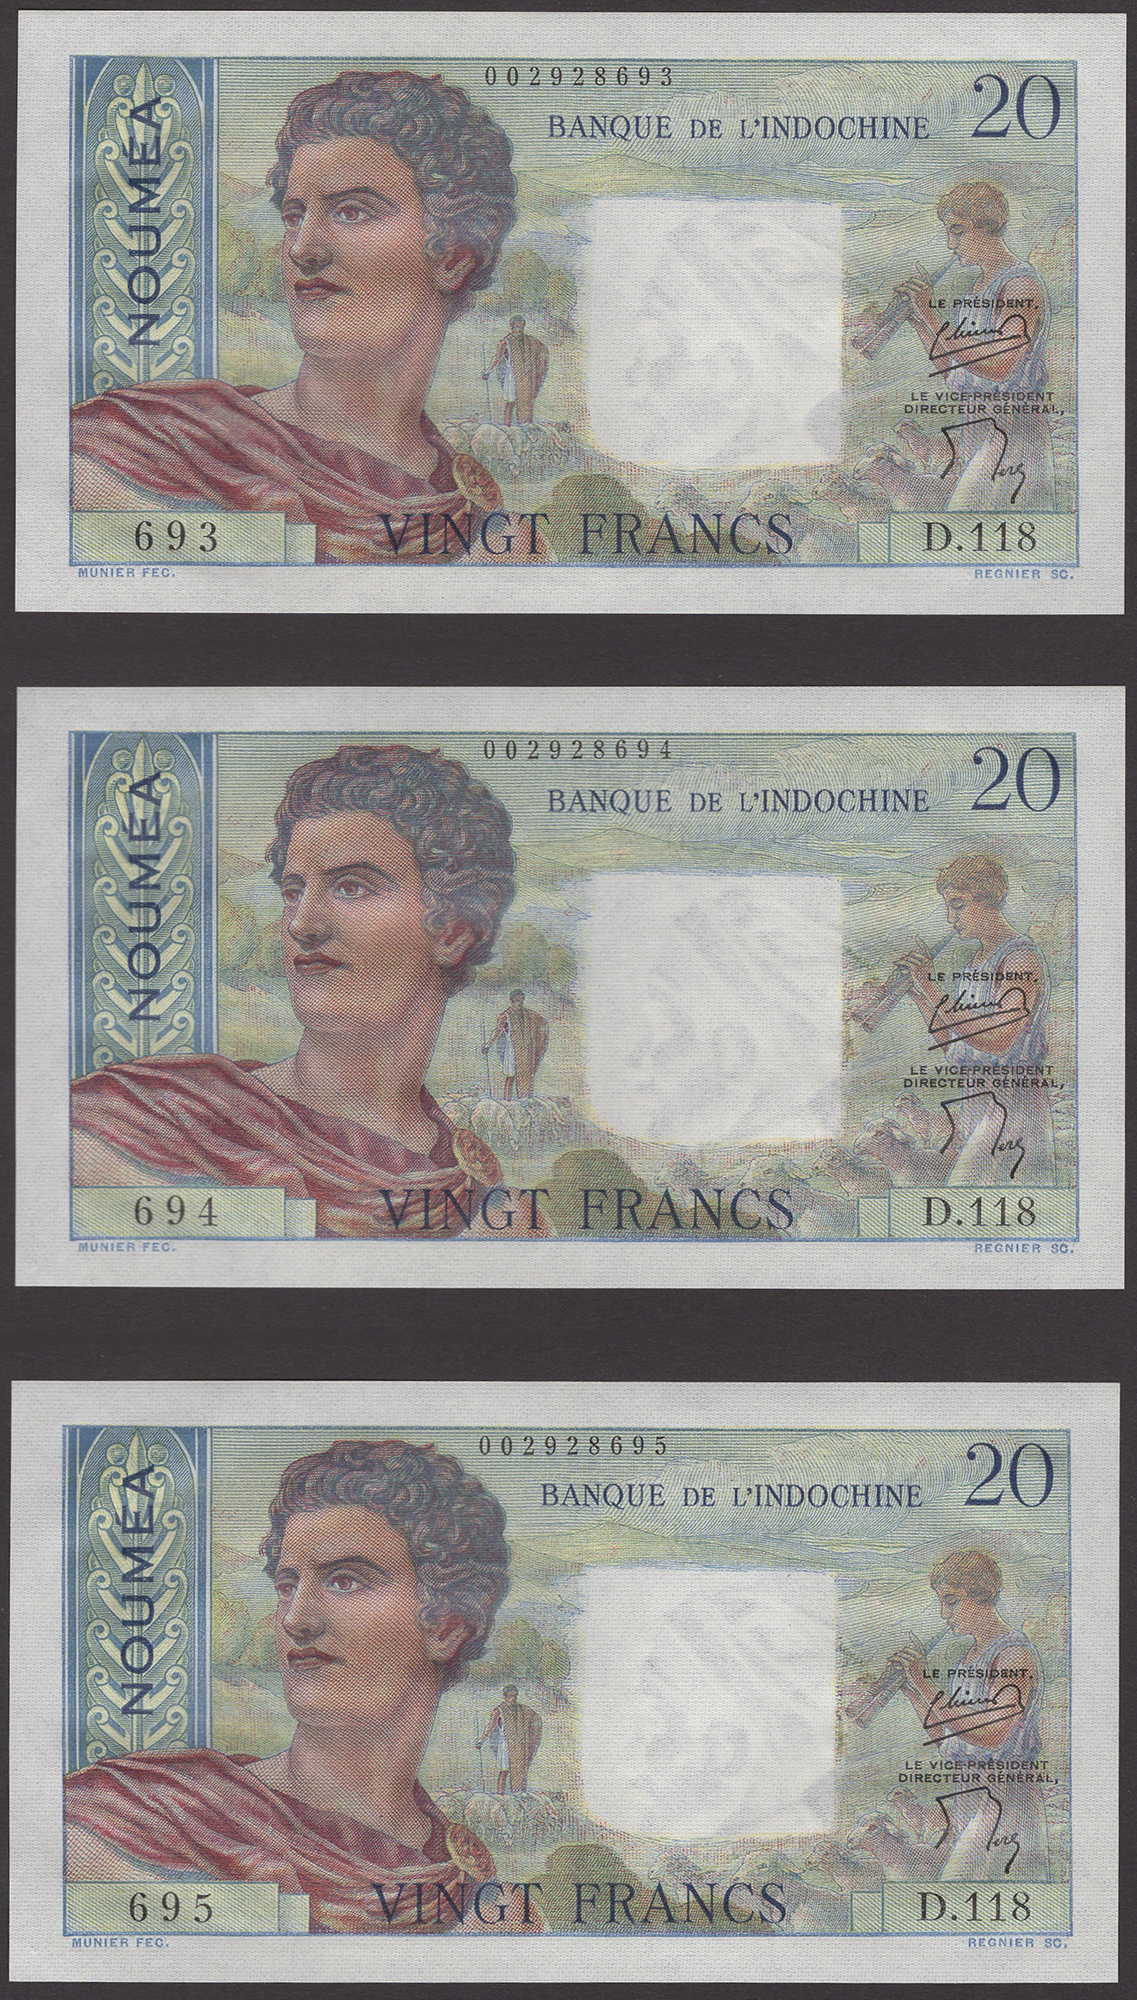 Banque de l'Indochine, New Caledonia, 20 Francs (5), ND (1951), serial number D.118 684-85... - Image 3 of 4